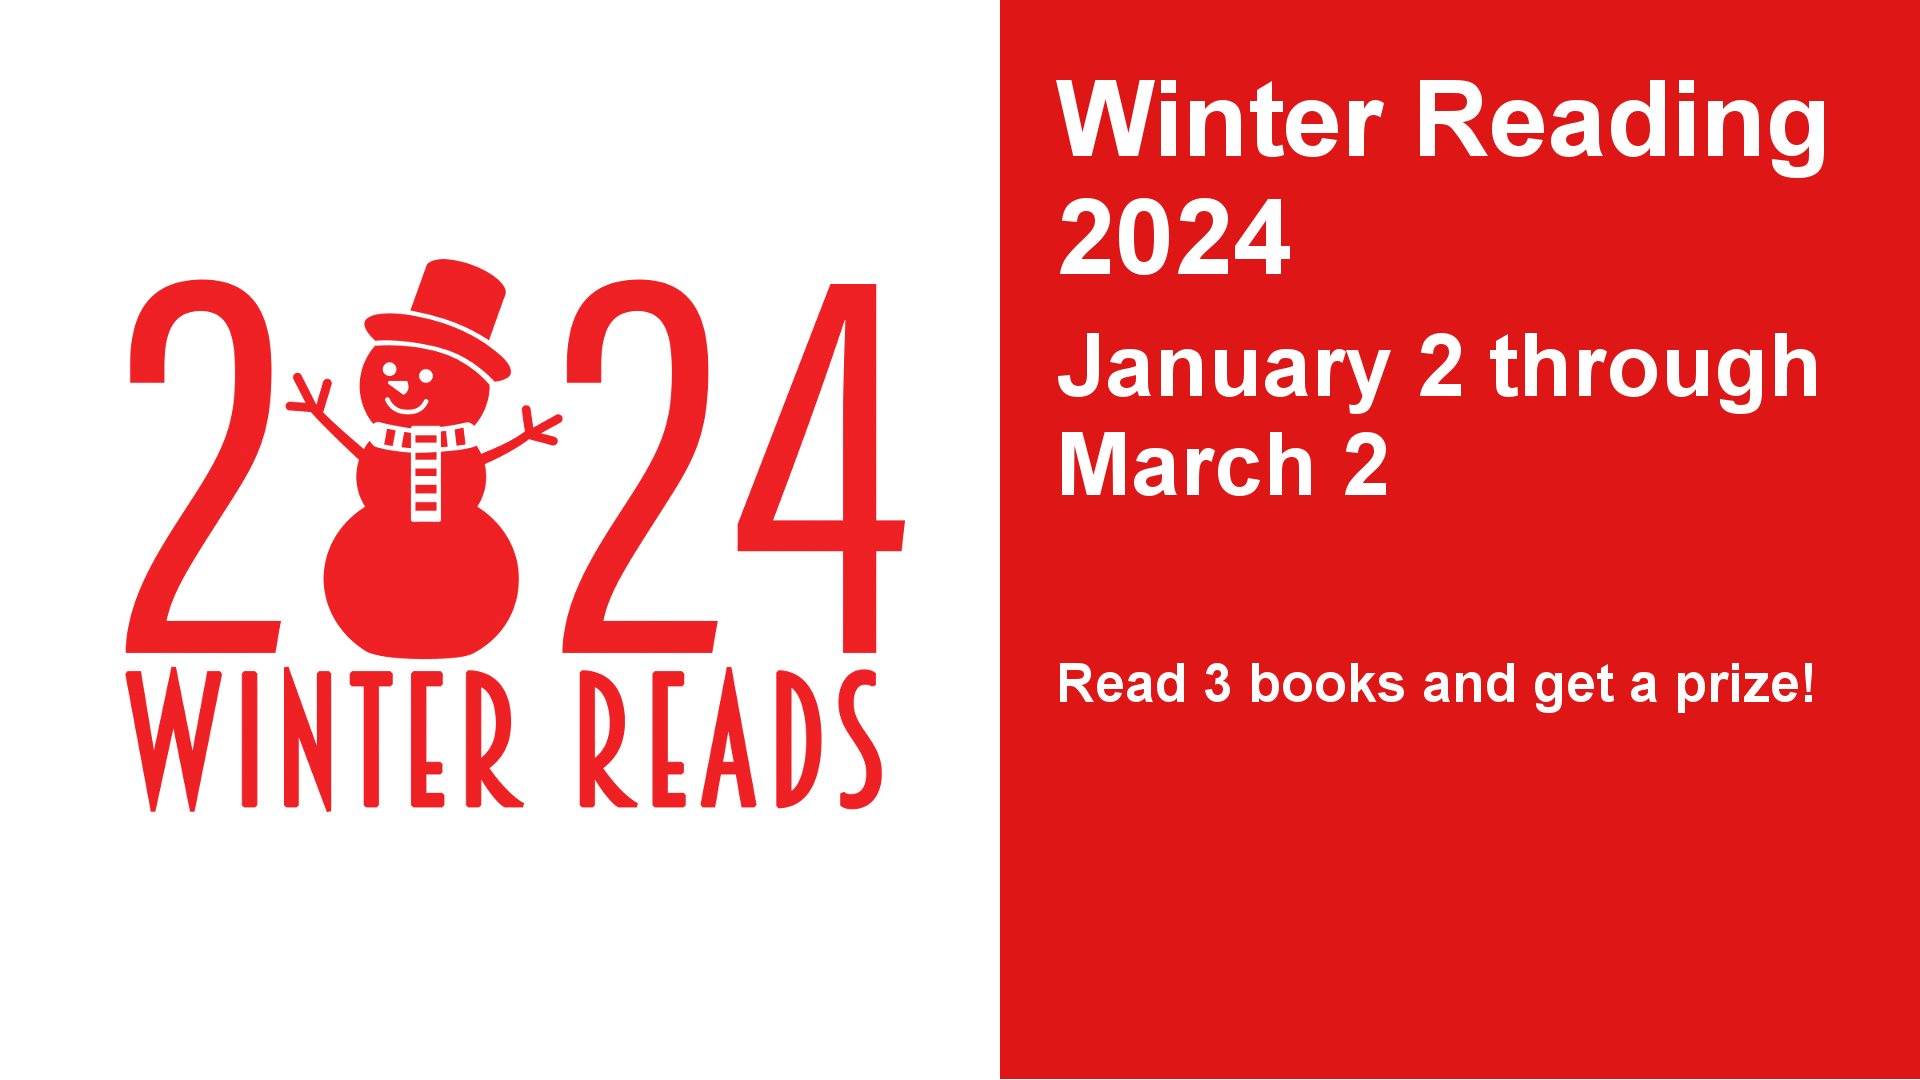 Winter Reading 2024

January 2 to March 3

Read 3 books and win a prize